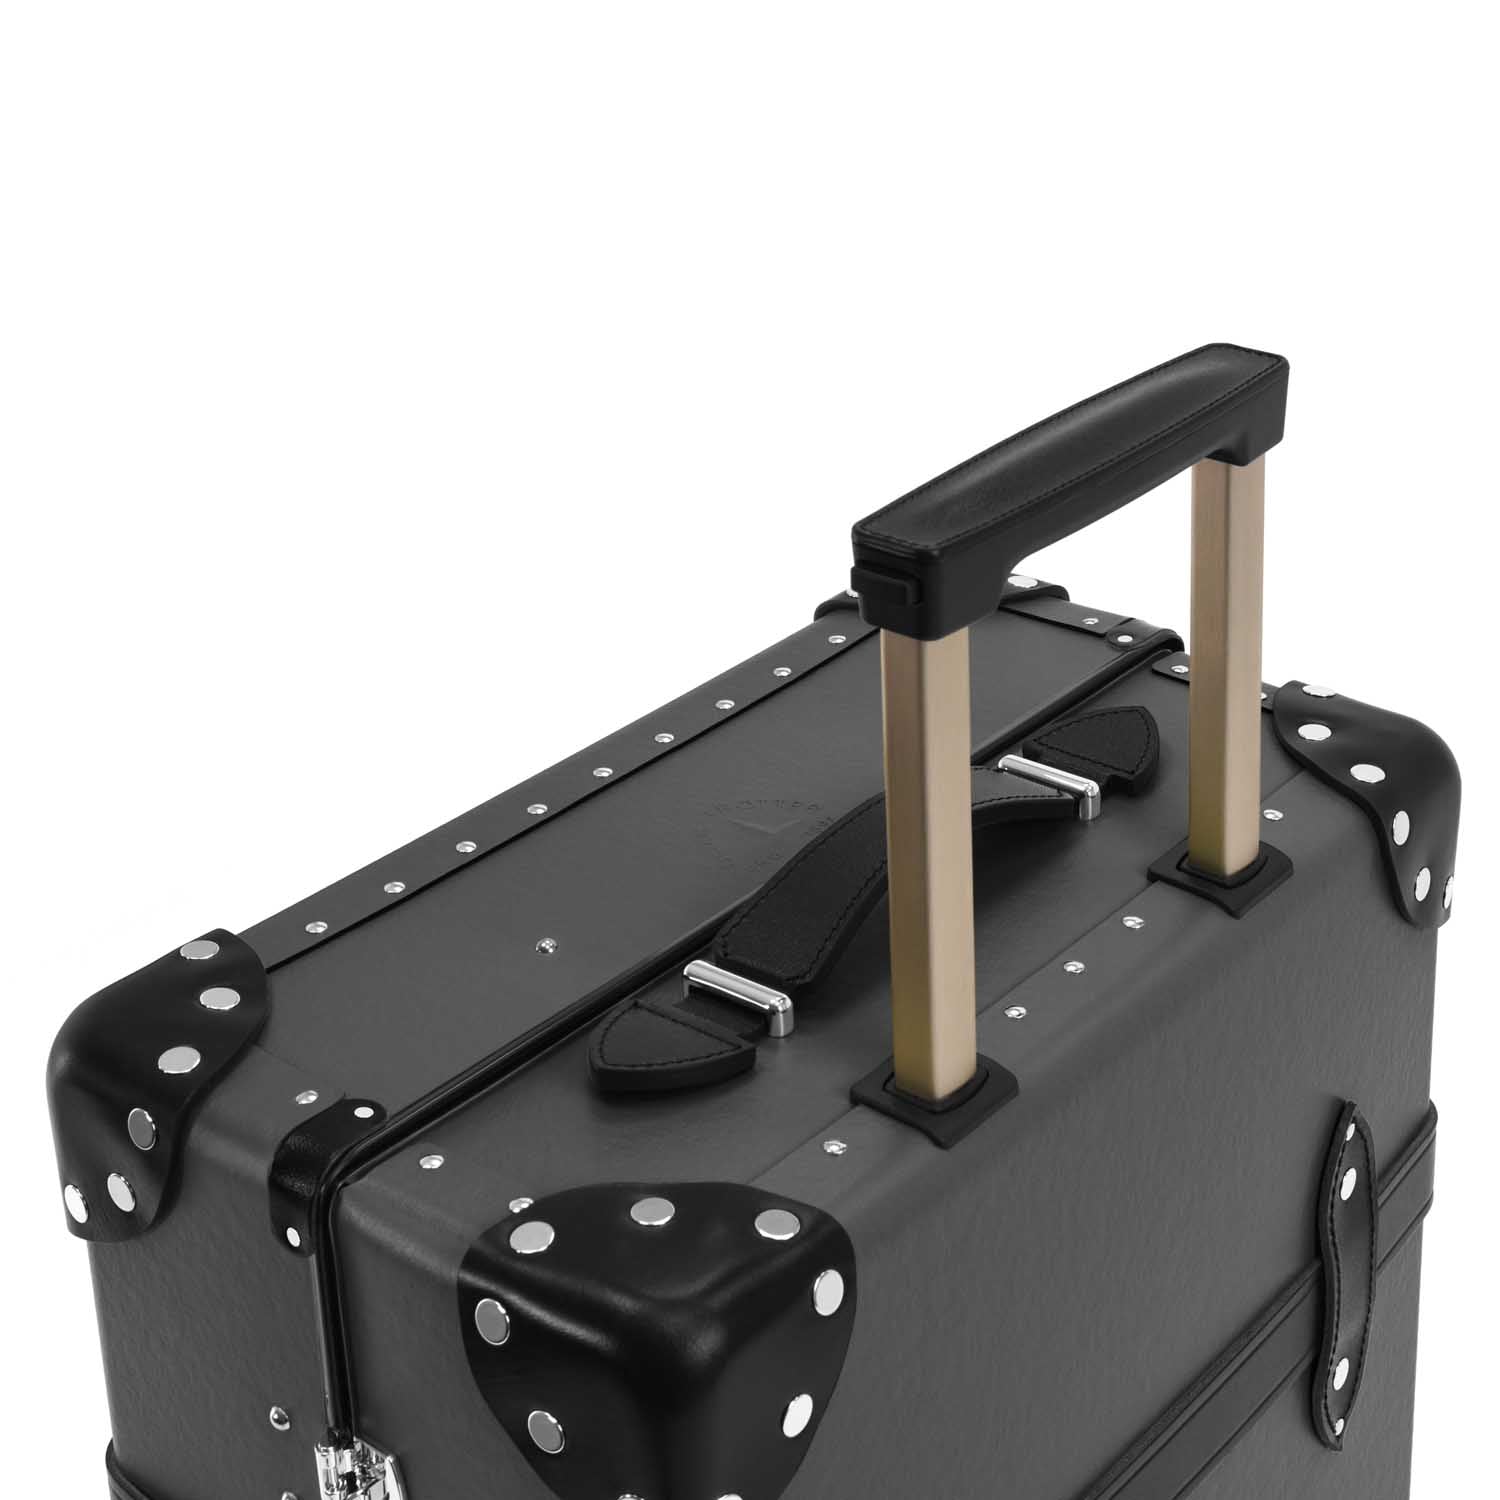 Centenary · Carry-On - 4 Wheels | Charcoal/Black/Chrome - Globe-Trotter Staging